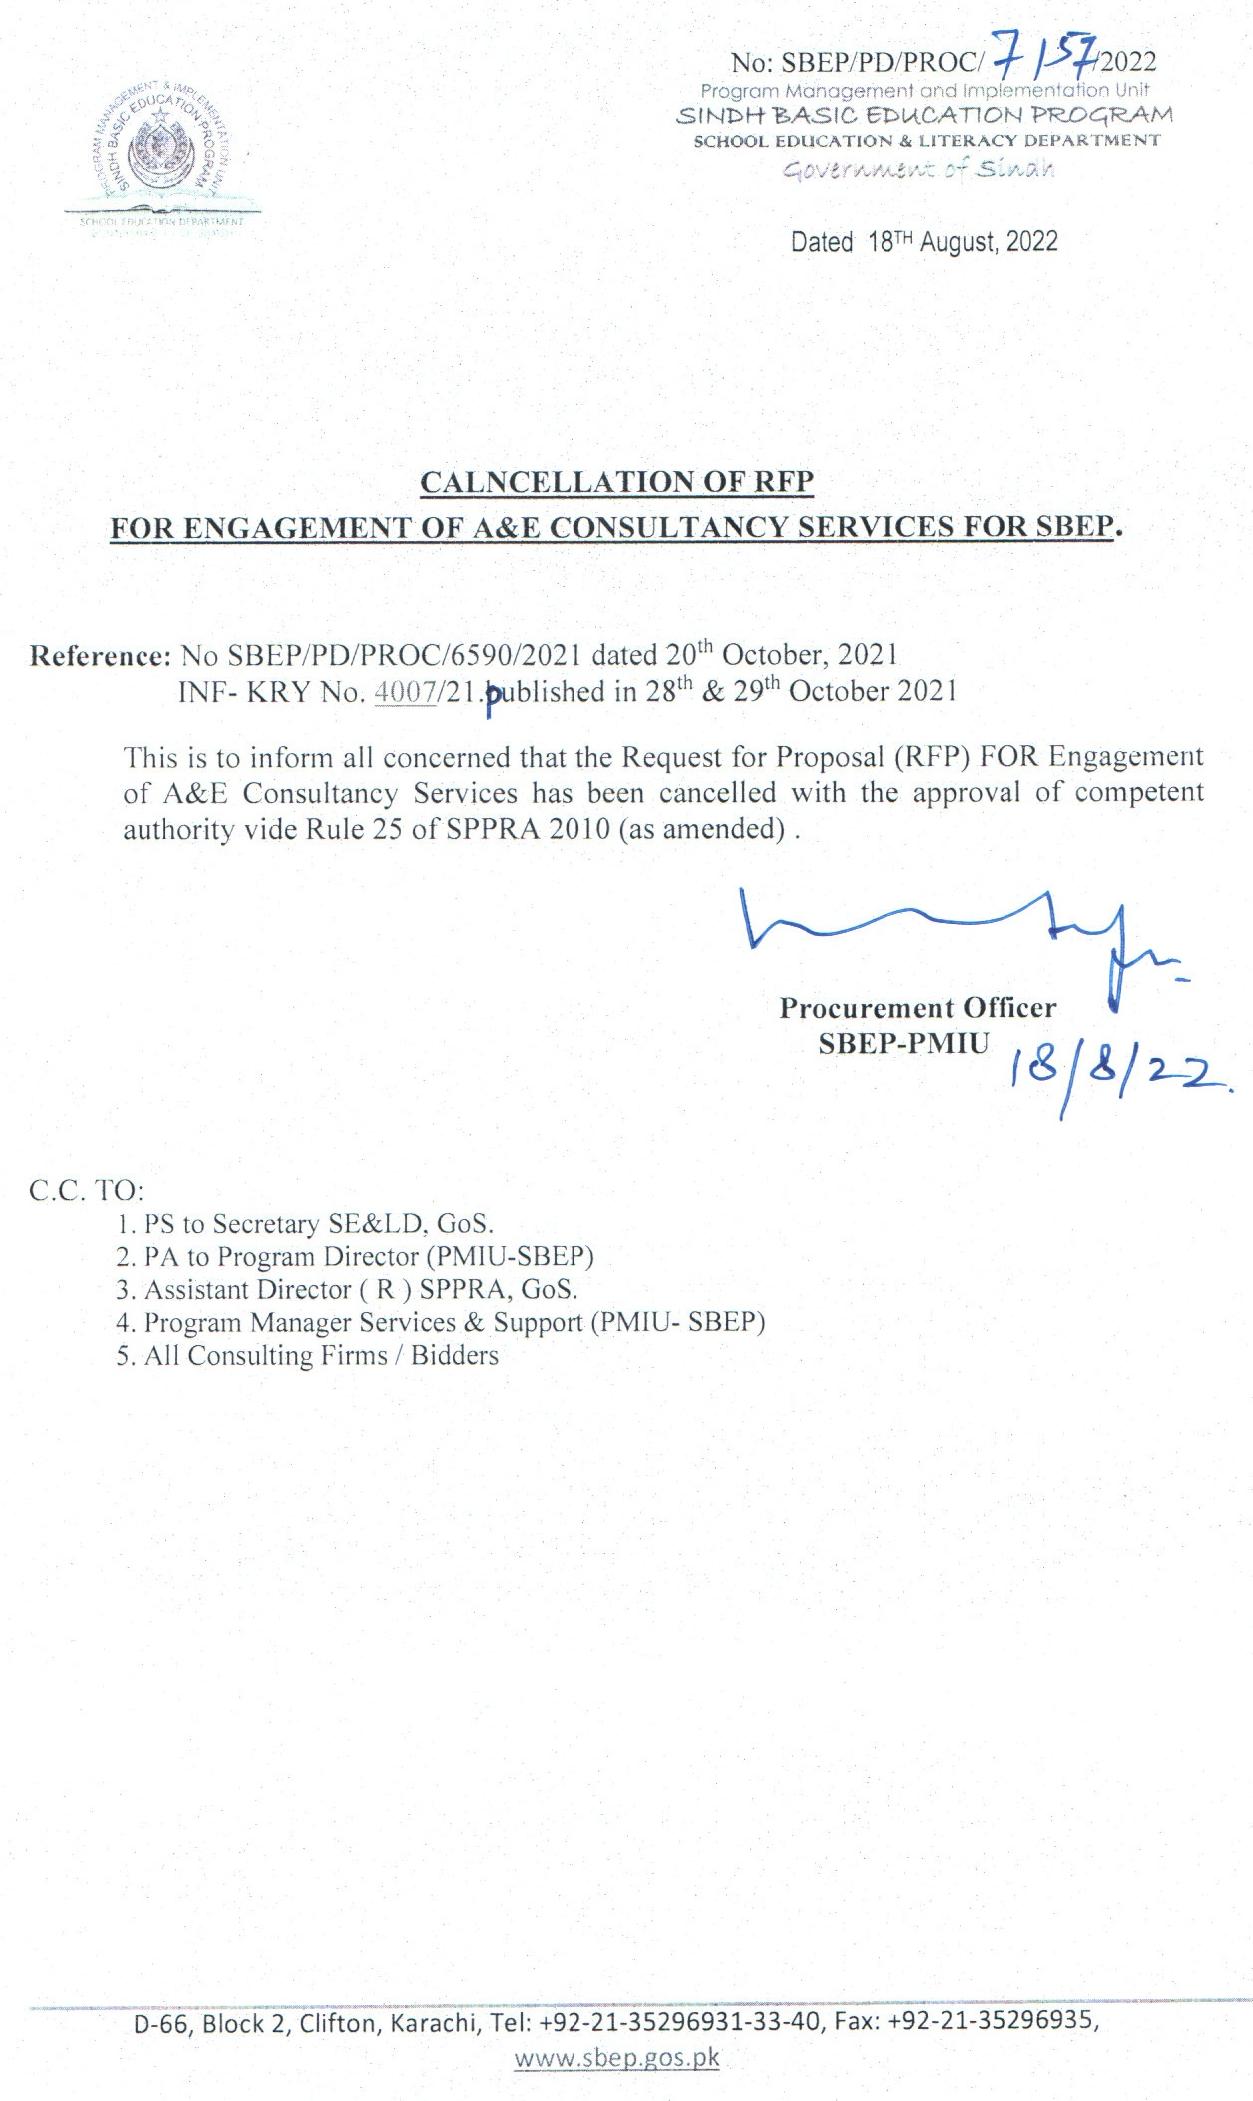  Cancellation of RFP for Engagement of AE Services